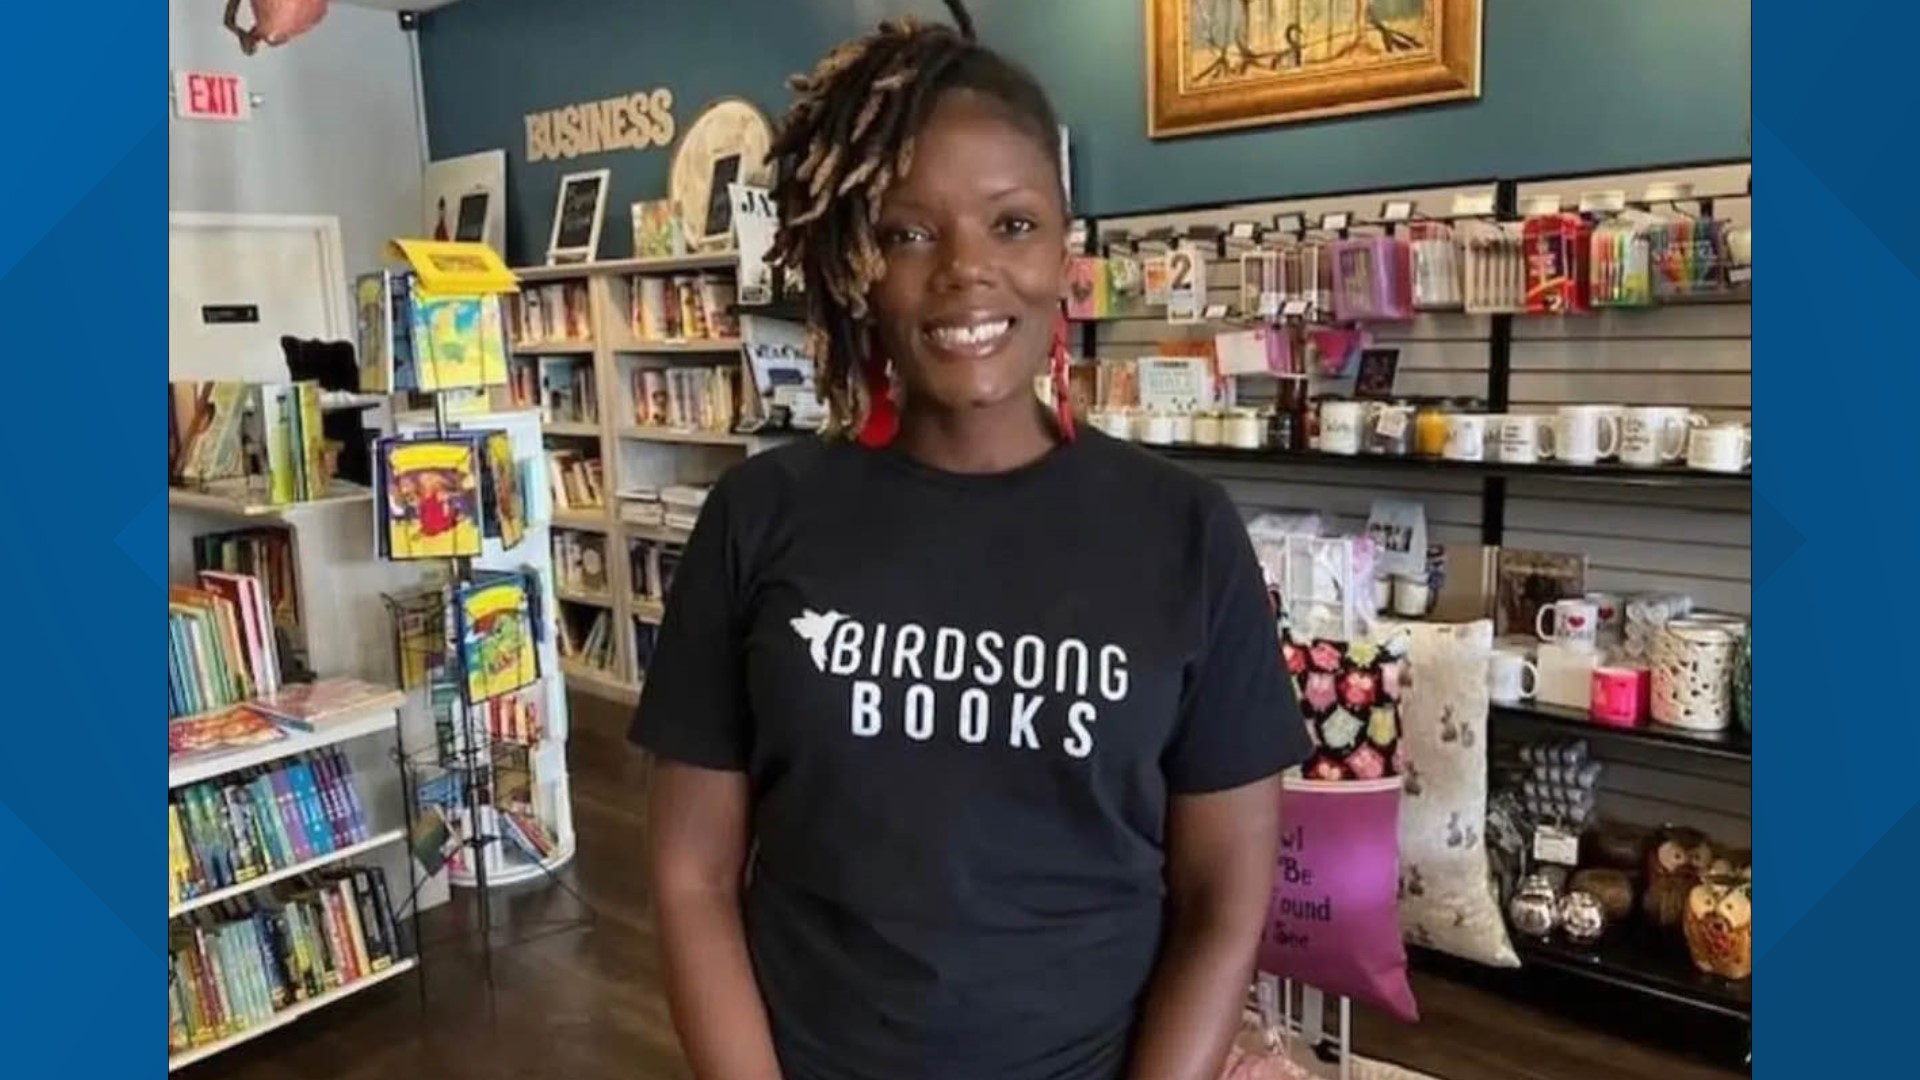 Erica Atkins was the owner of Birdsong Books in Henry County and was a beloved member of her community.